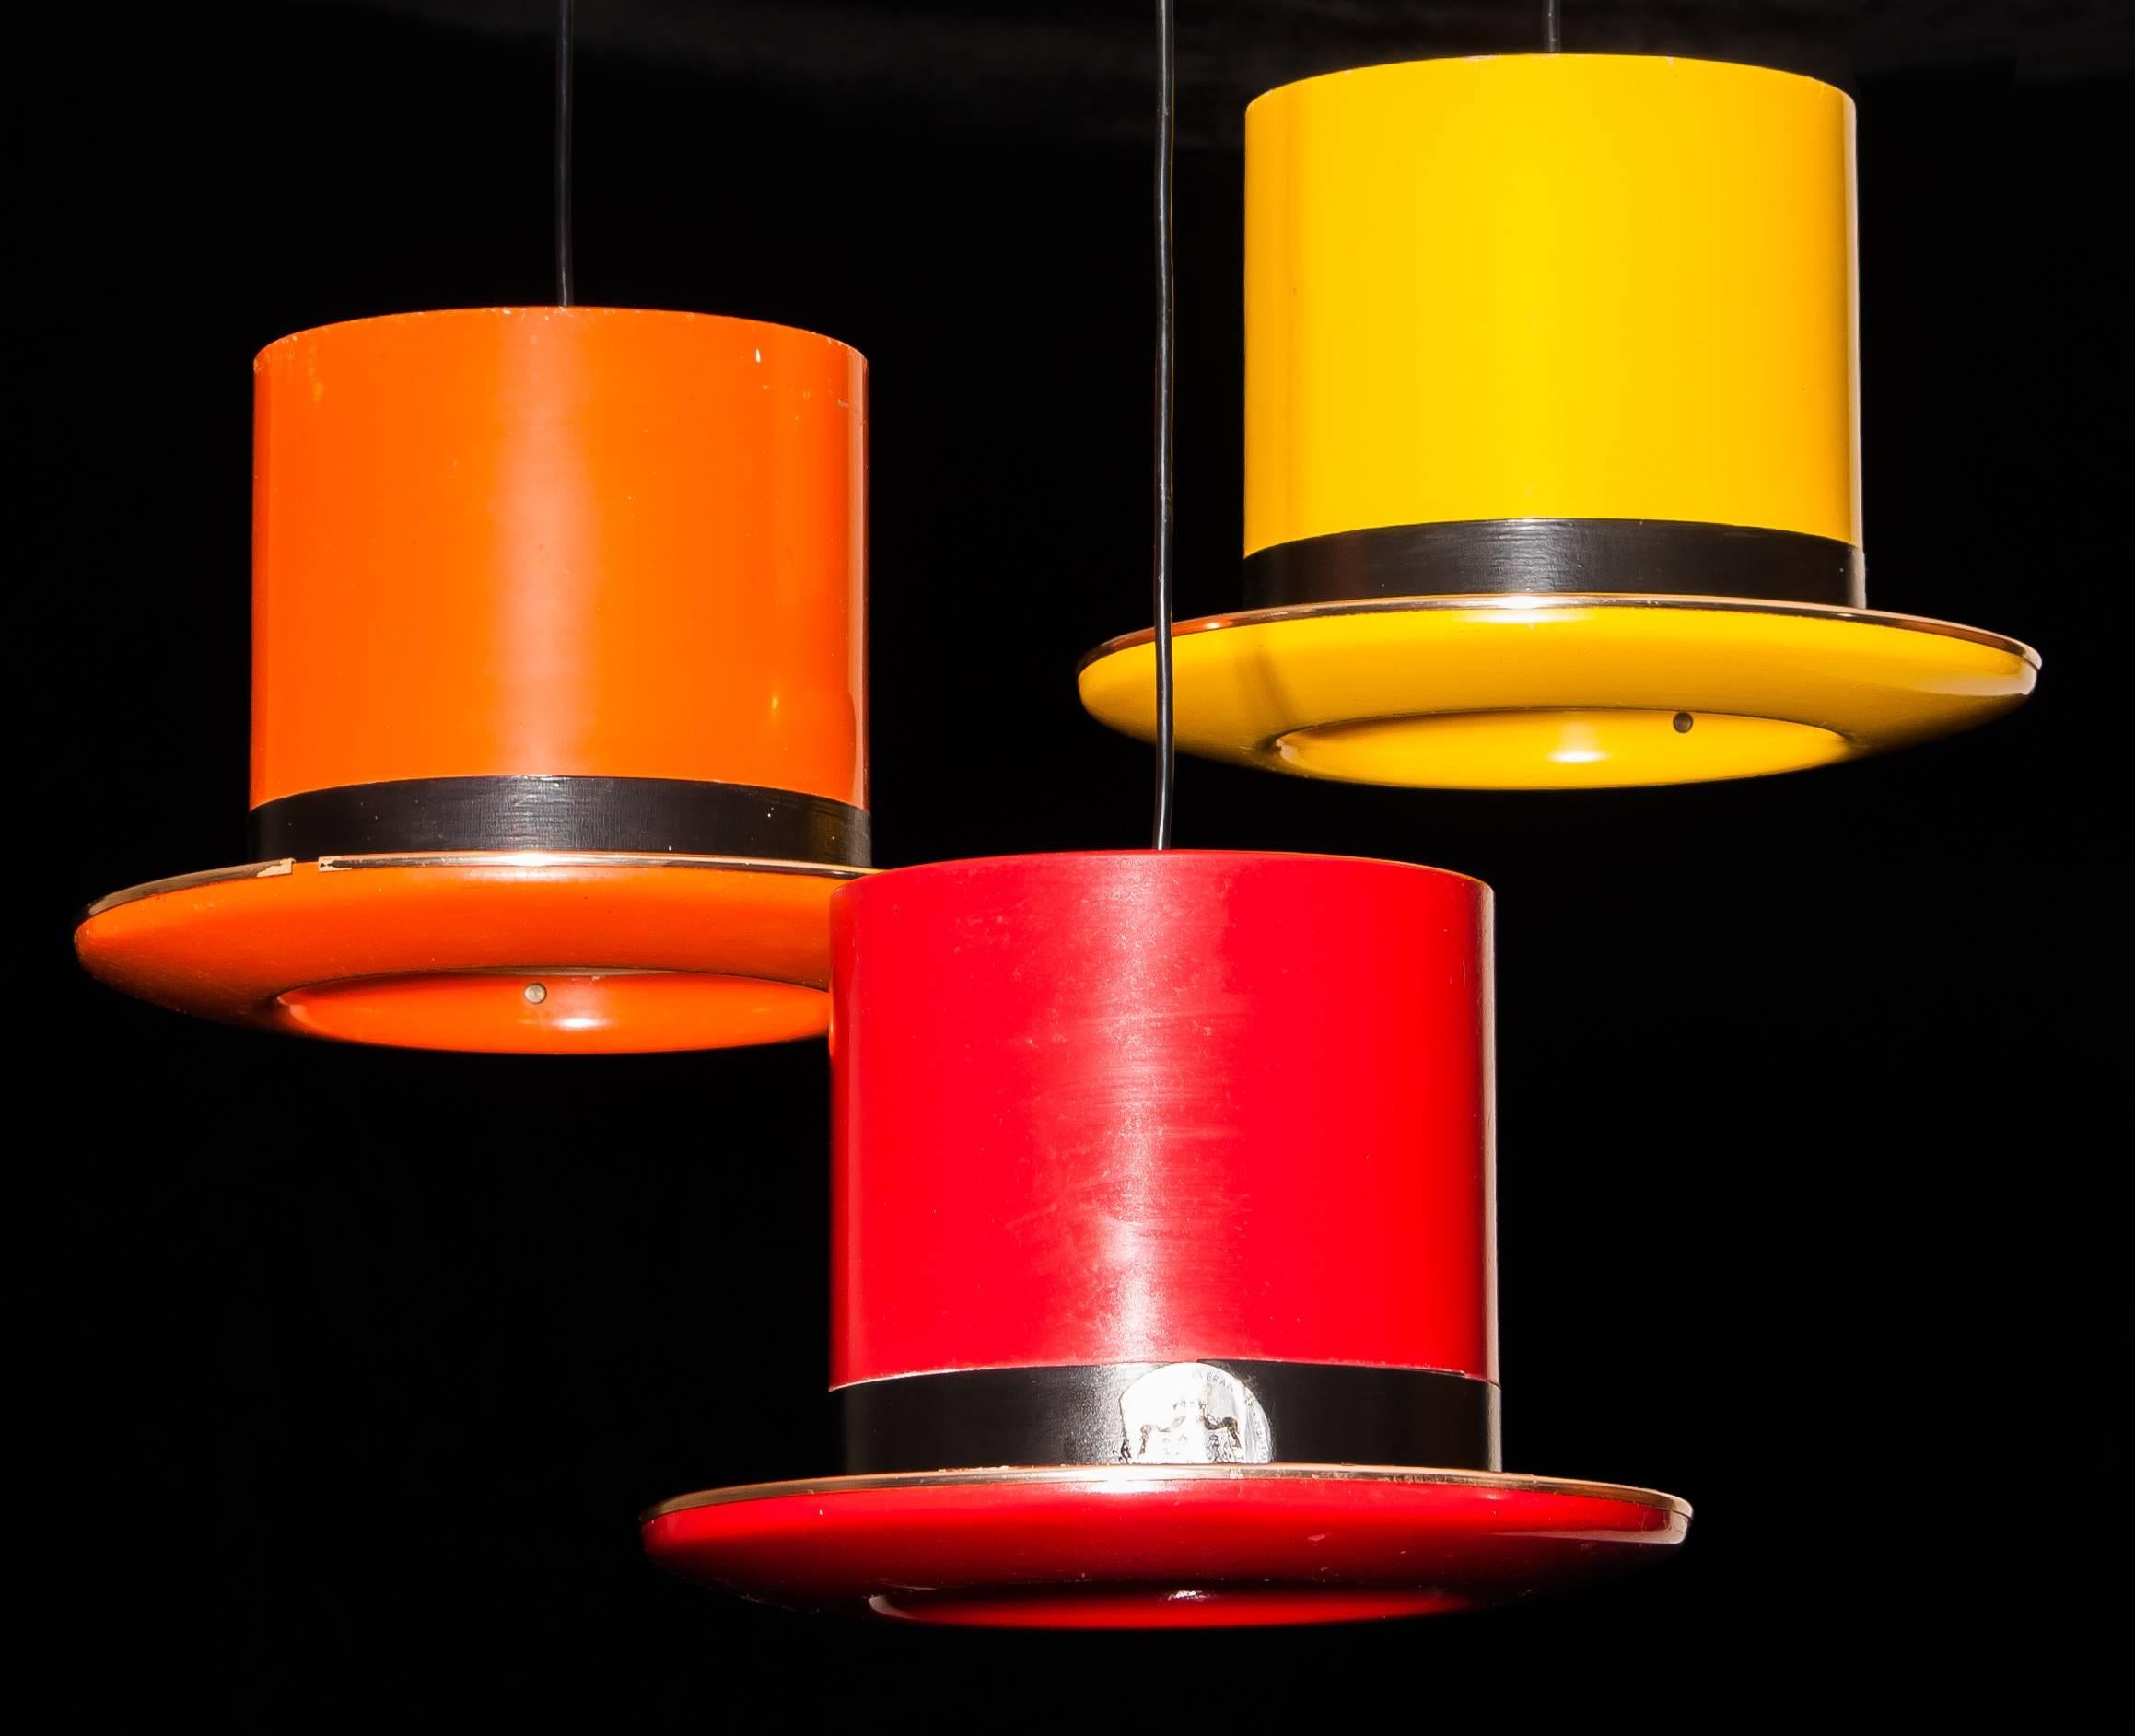 Very nice hat pendant by Hans-Agne Jakobsson for AB Markaryd Sweden.
The lamps are made of orange and yellow lacquered aluminium with a brass-plated trim.
They are in a original condition and labelled.
The lamps are in a working, wear consistent